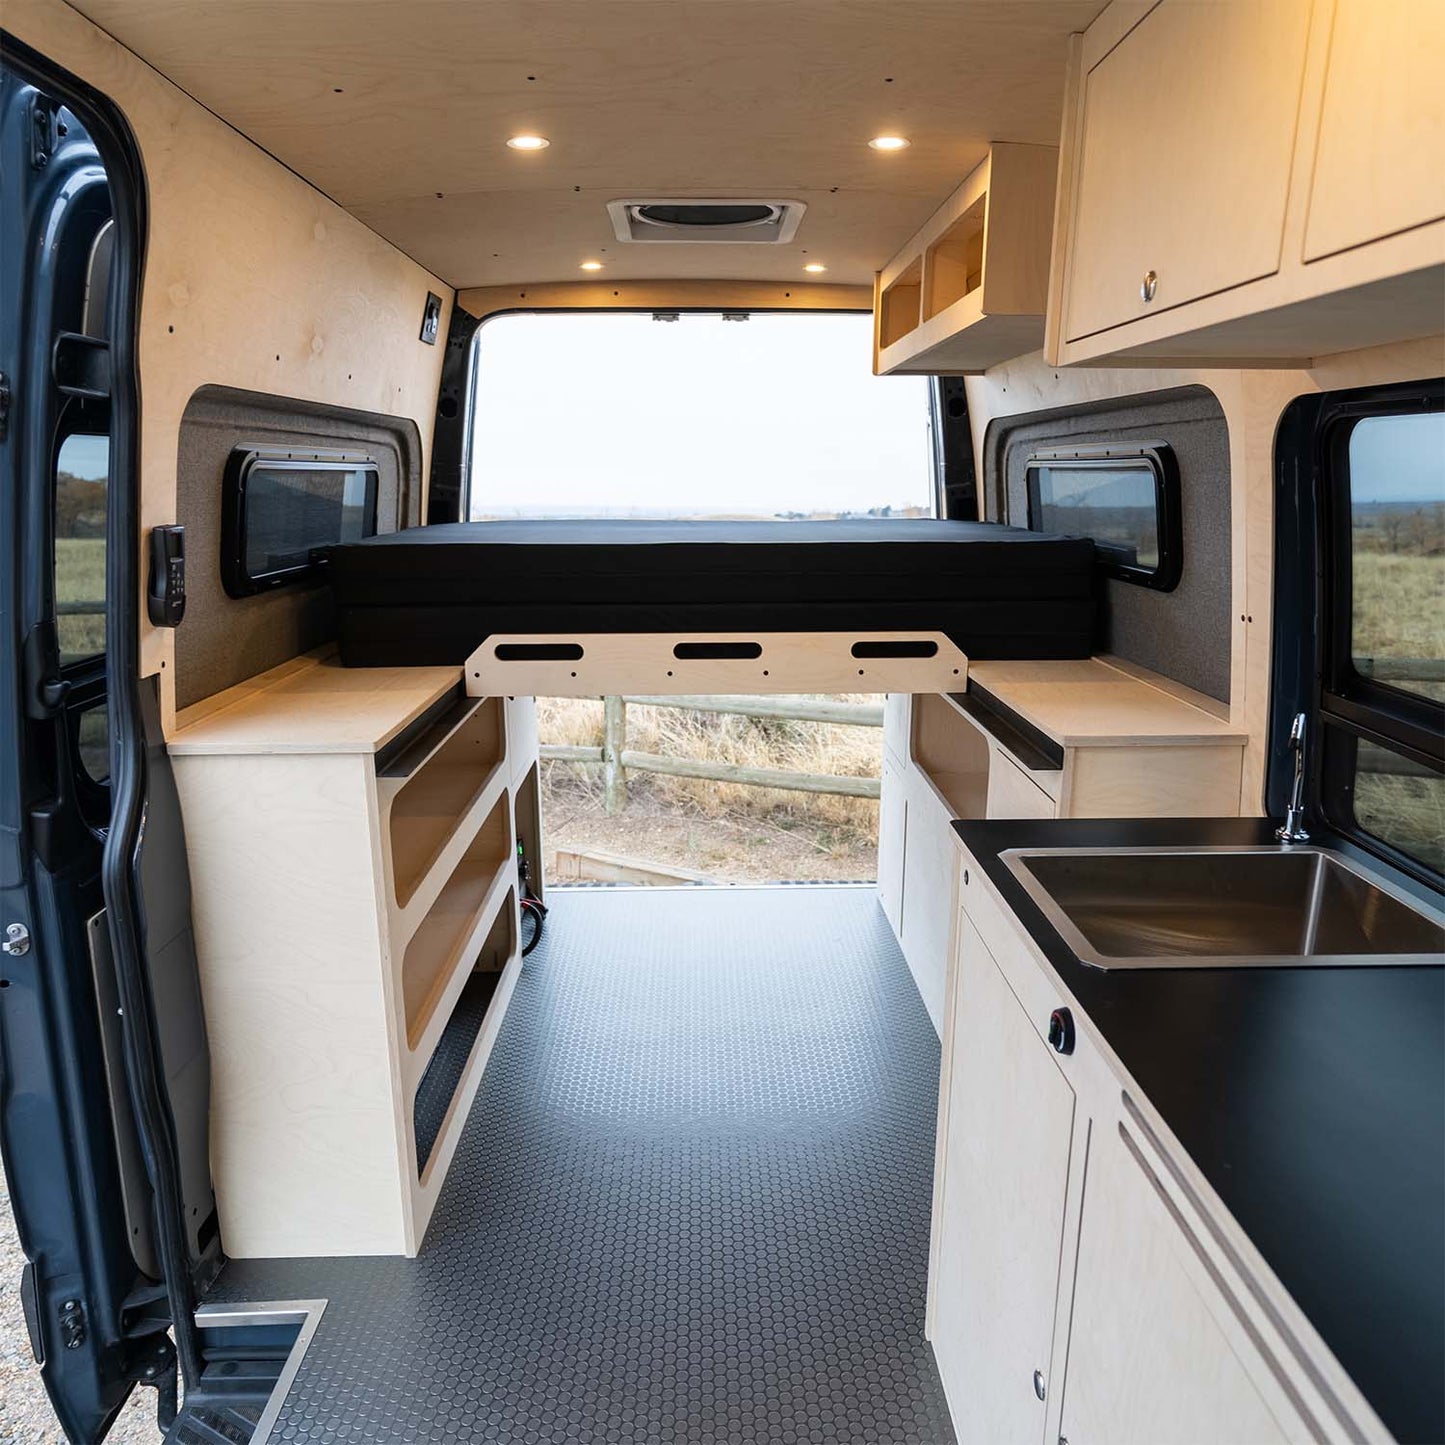 Bed and Wheel Well Cabinets for Sprinter Vans